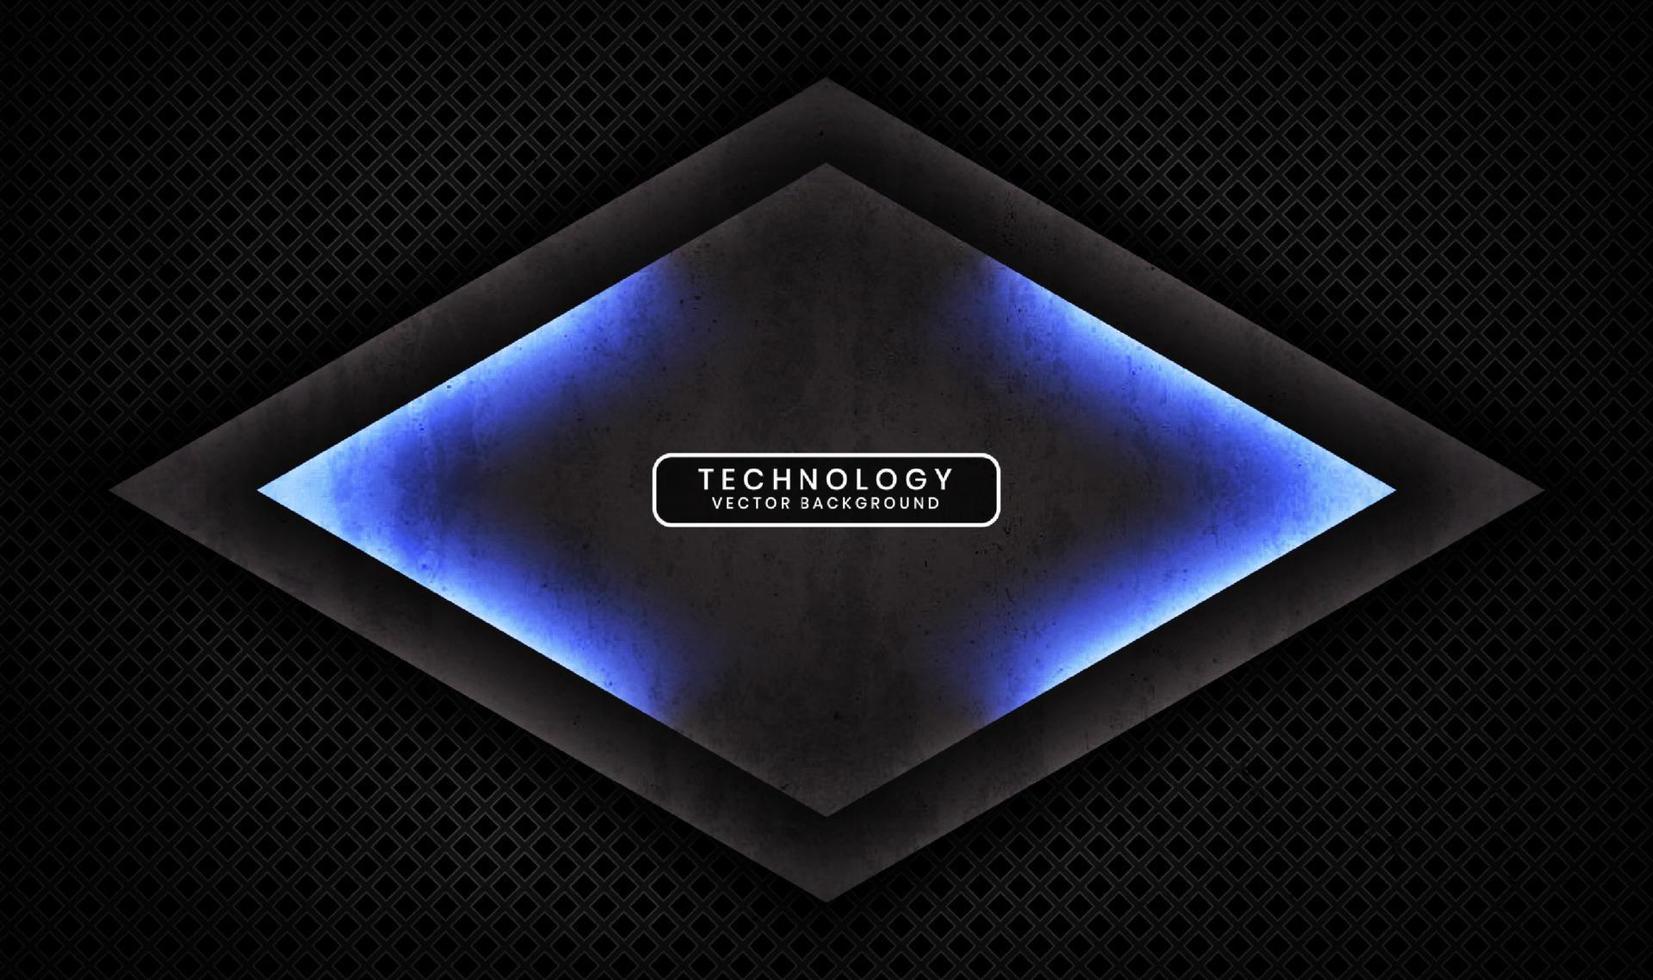 3D black rough grunge techno abstract background overlap layer on dark space with blue light decoration. Modern graphic design element cutout style concept for banner, flyer, card, or brochure cover vector